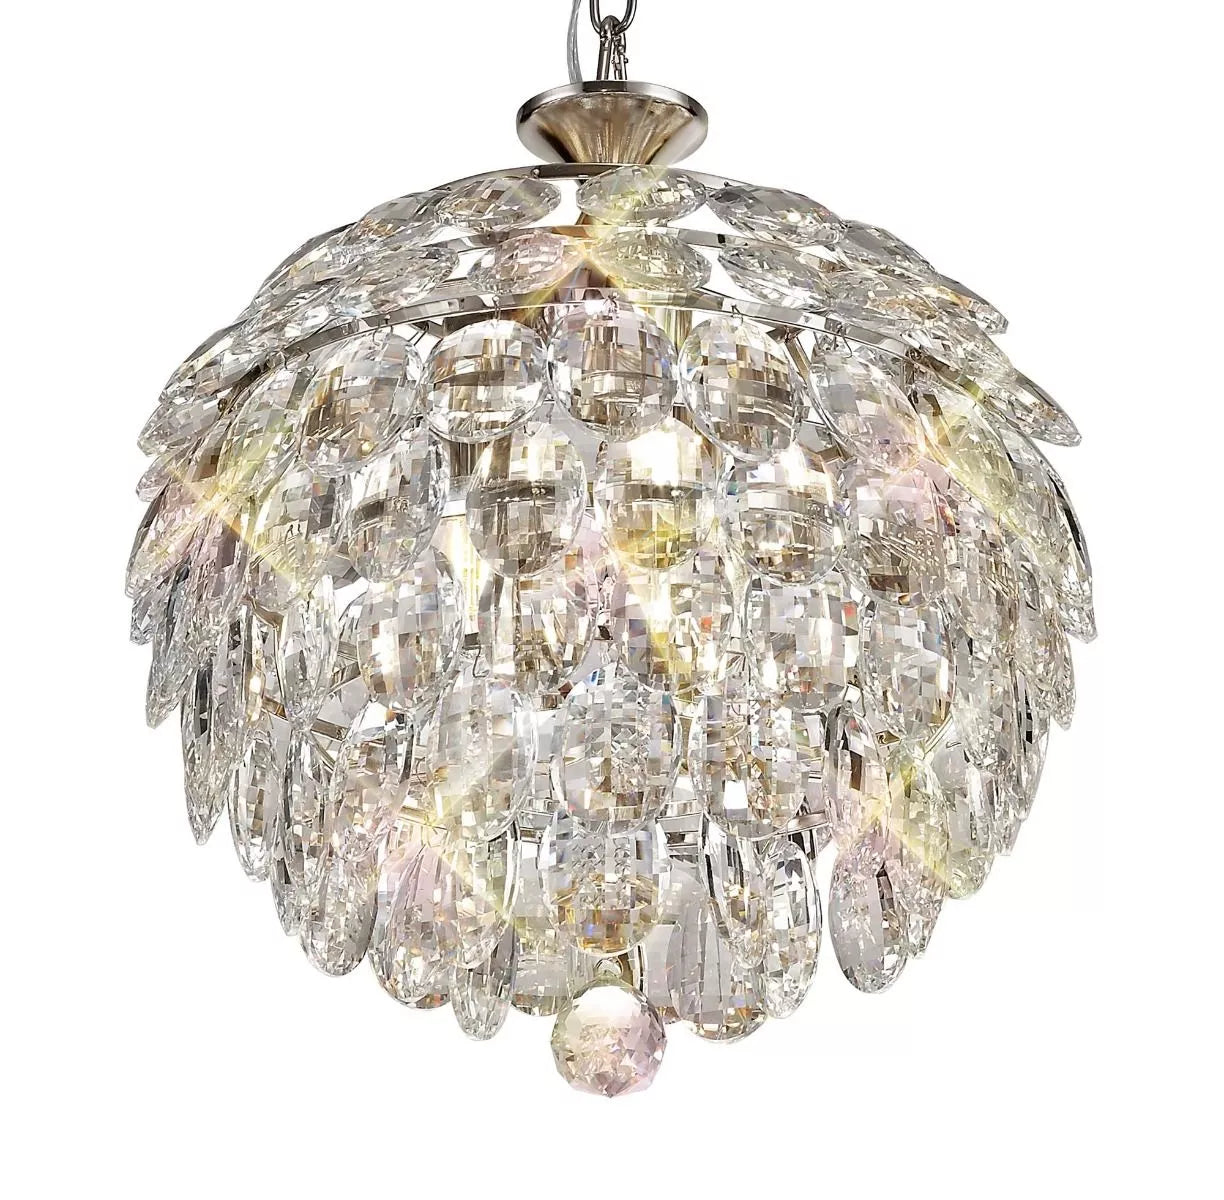 Coniston IL32800 Crystal 3 Light Small Pendant with Polished Chrome Frame by Diyas